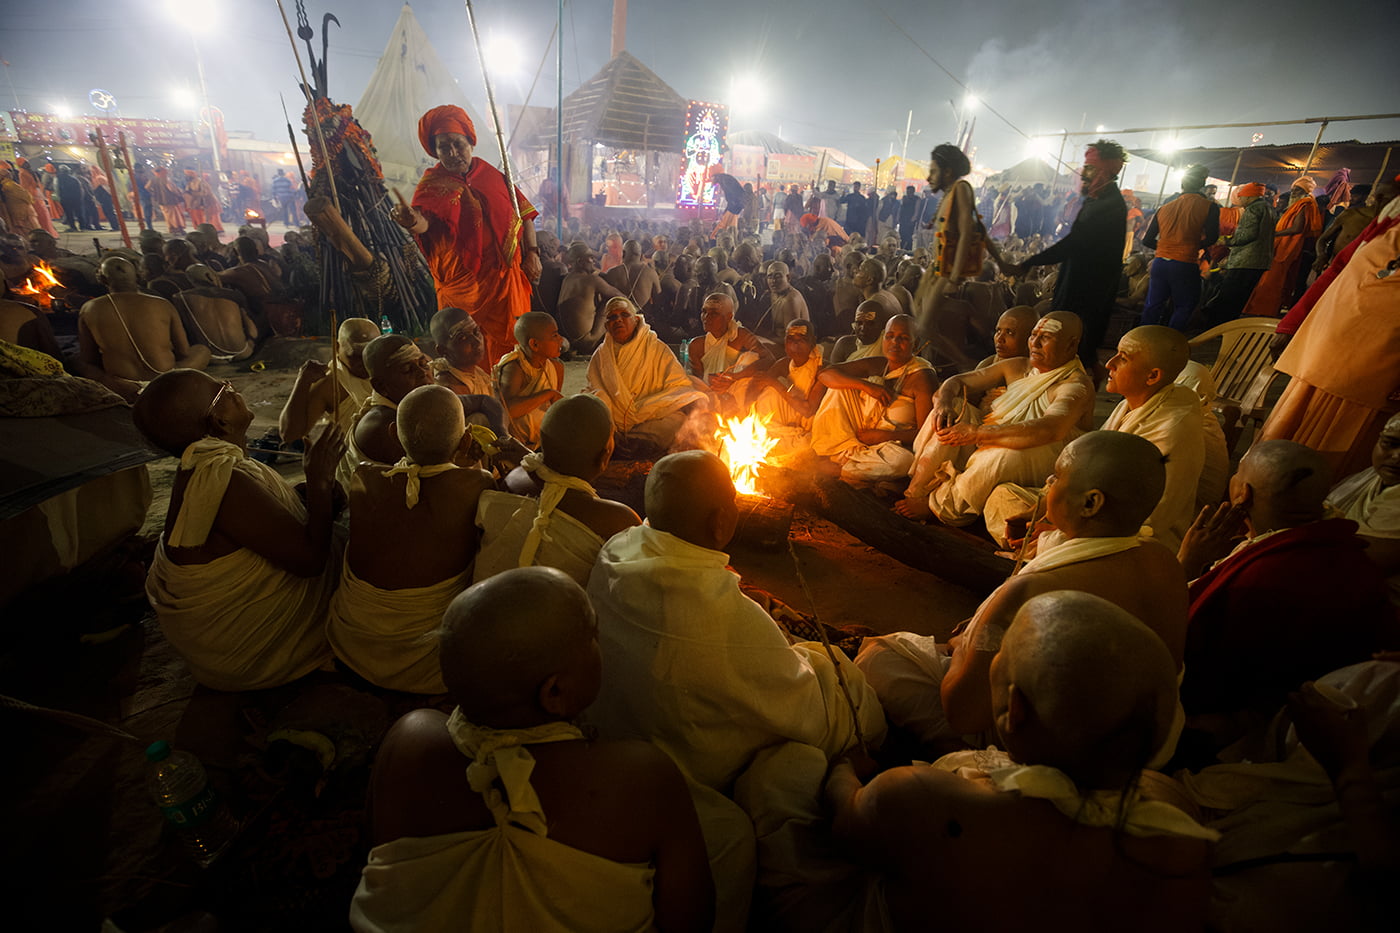 A group of Naga Sadhvis also called “Maata” are sitting in front of a fire during a mass initiation ceremony.